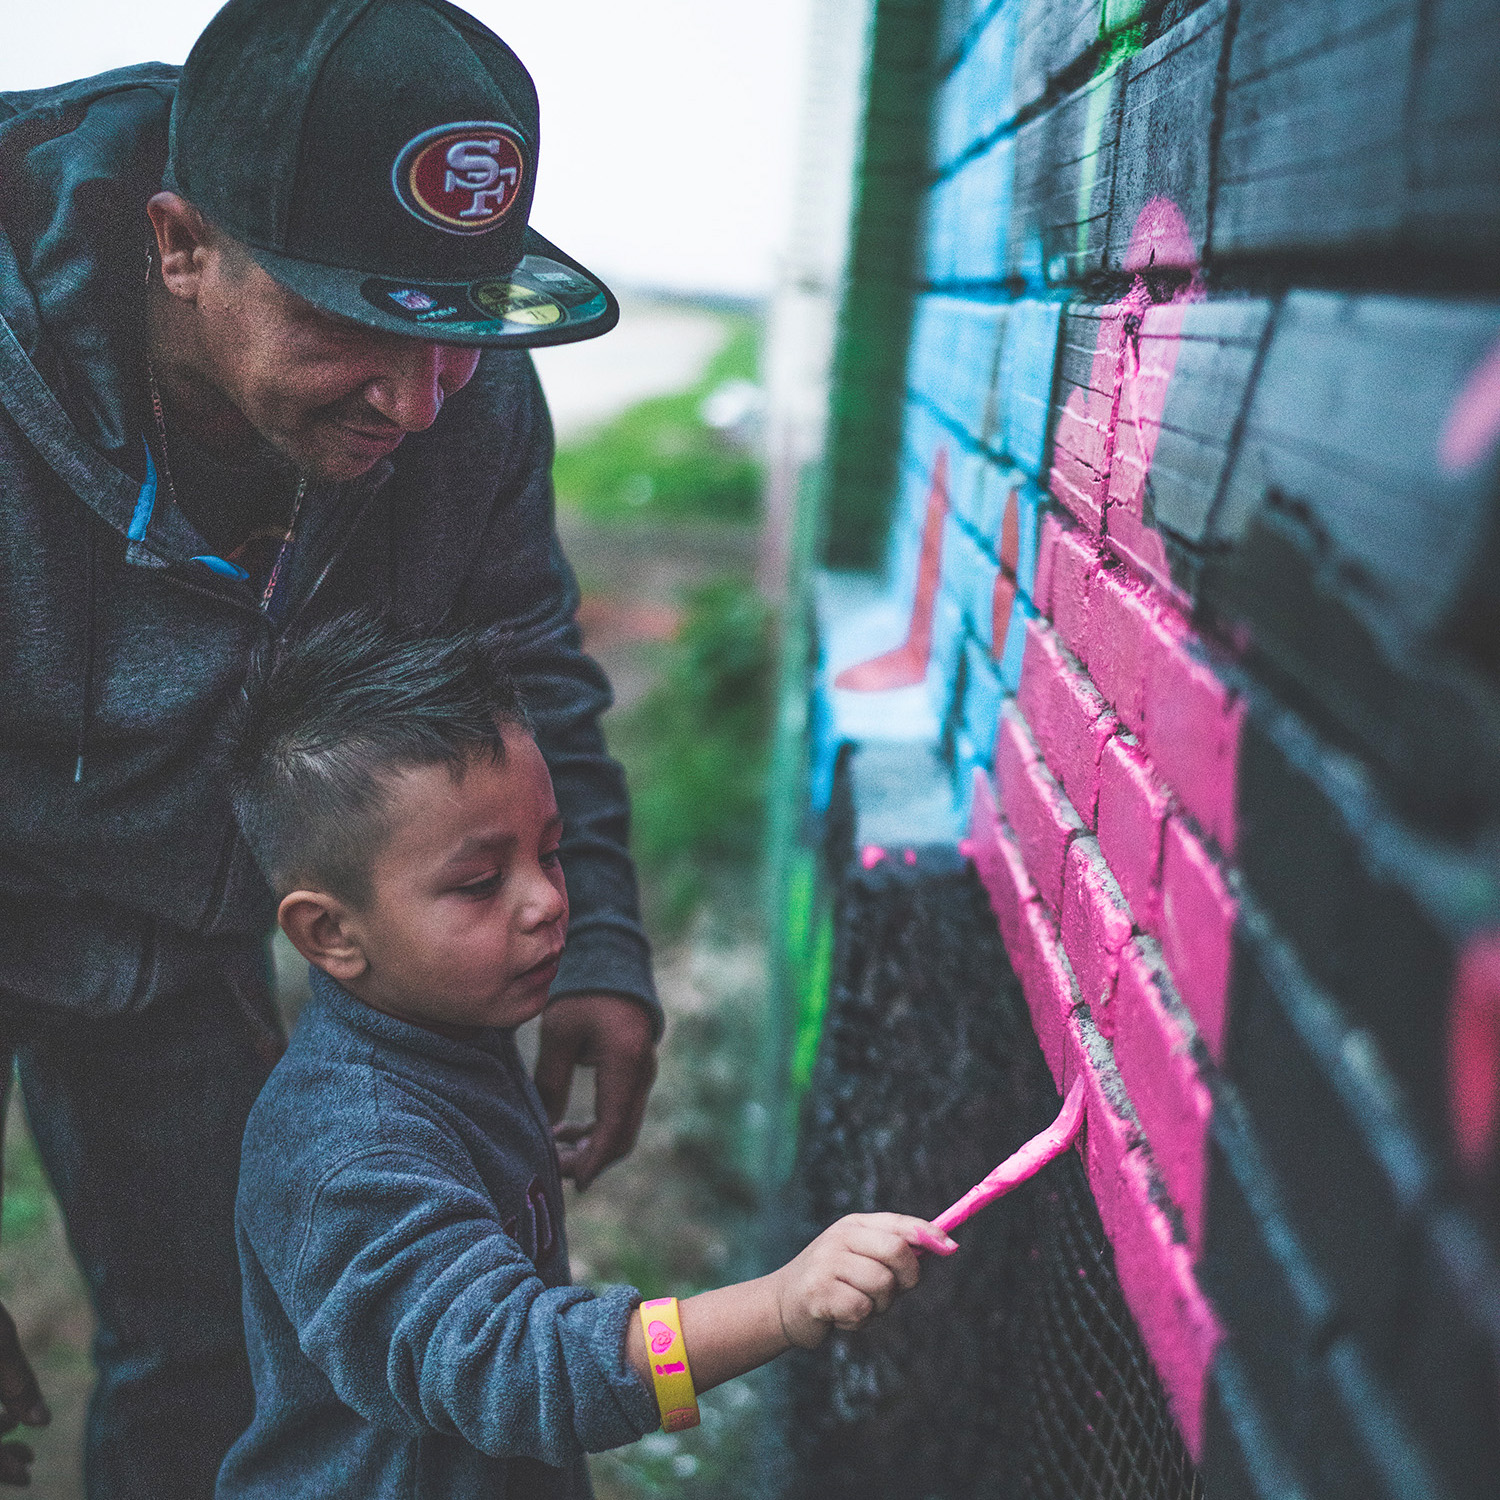 A man and a young boy paint a mural together